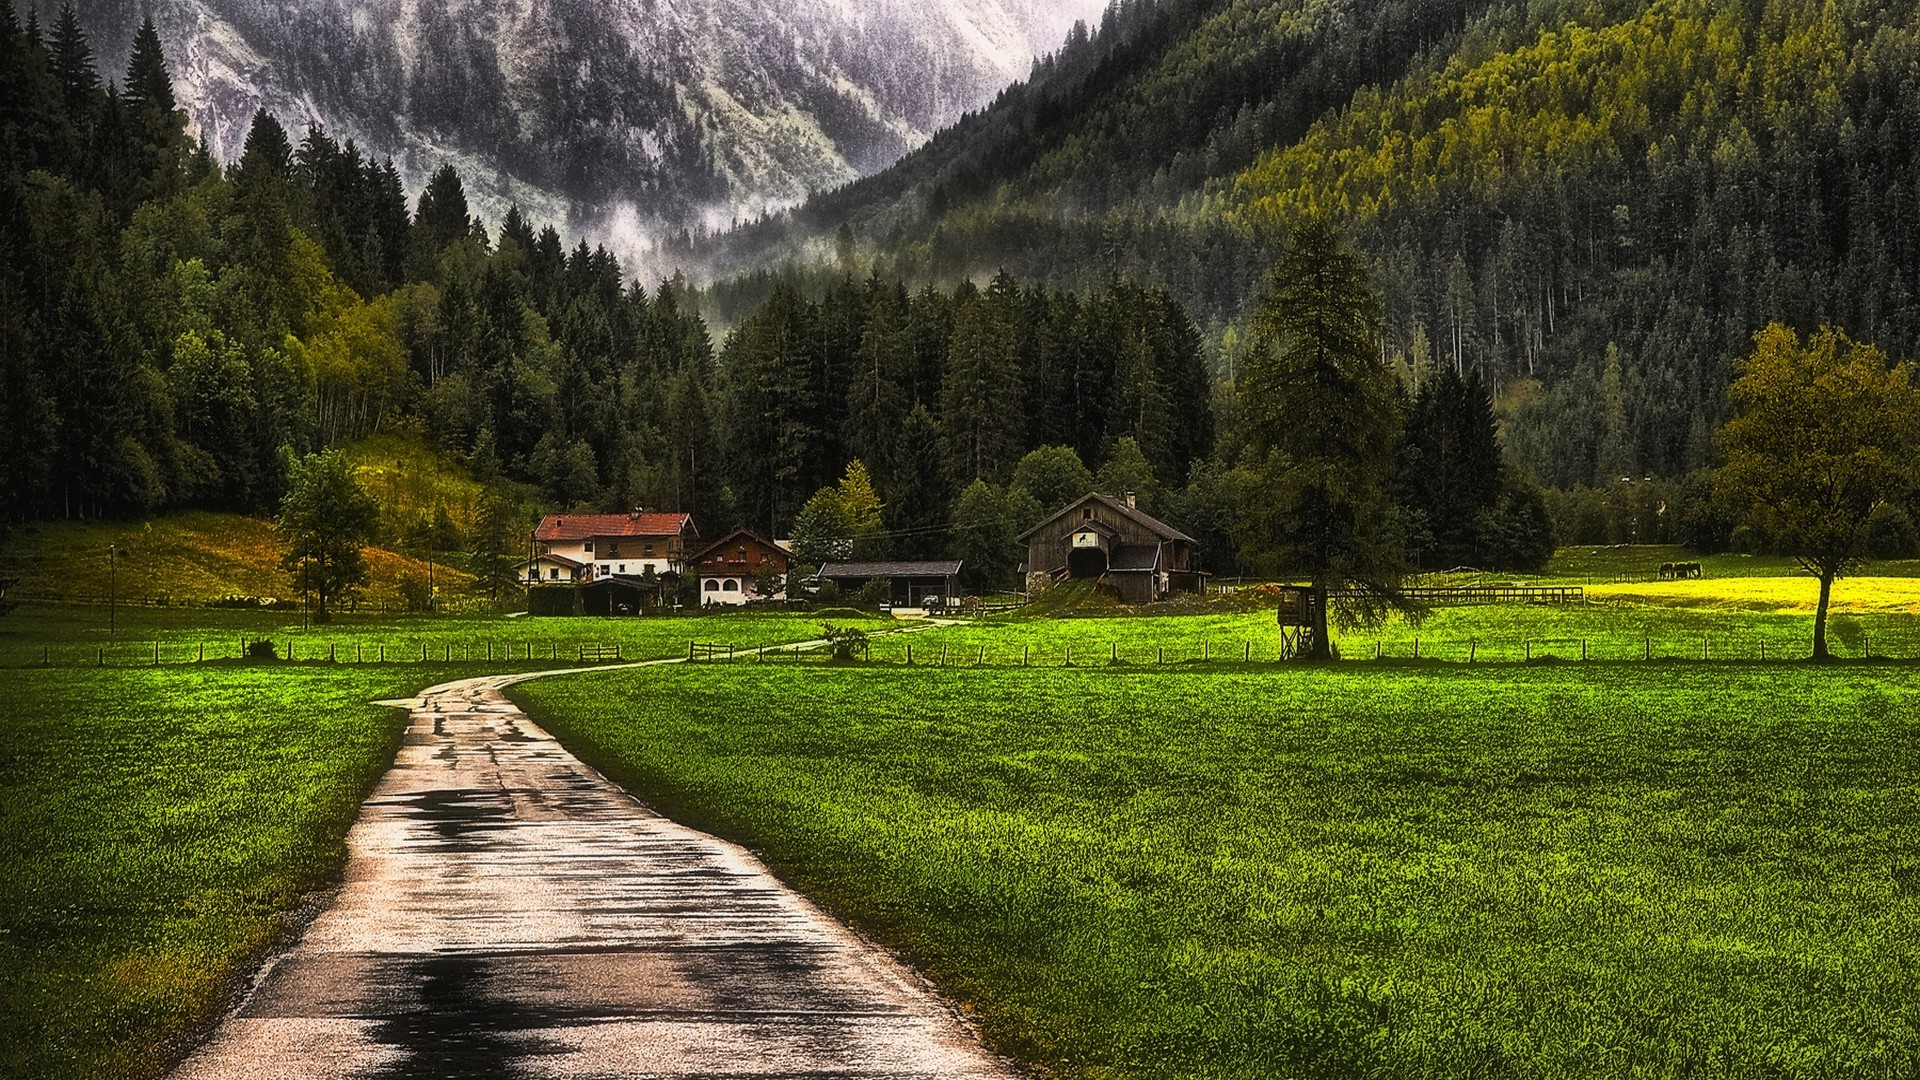 nature, Landscape, Mountain, Forest, Farm, Grass, Snow, Fence, Mist, Trees, Barns, Dirt Road, Path Wallpaper HD / Desktop and Mobile Background